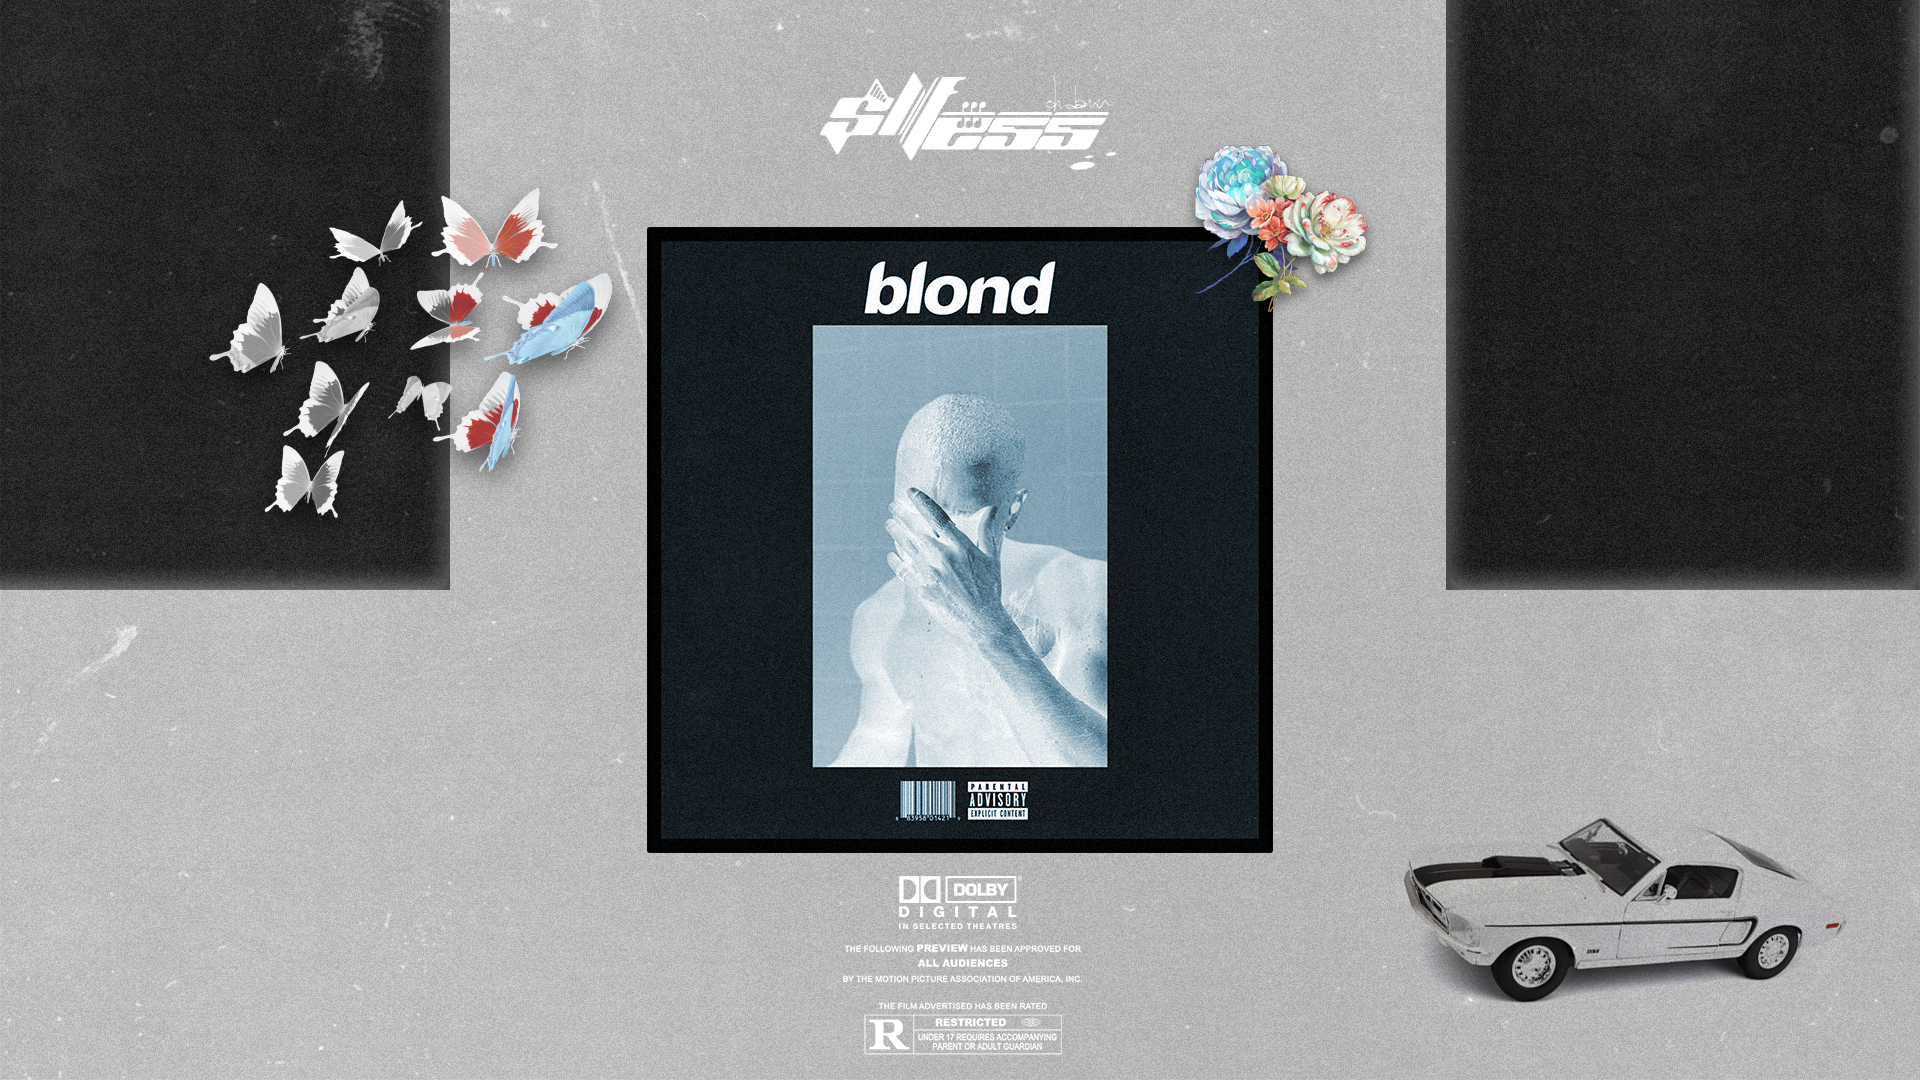 General 1920x1080 Frank Ocean music albums cover art singer car insect butterfly minimalism simple background text watermarked side view flowers